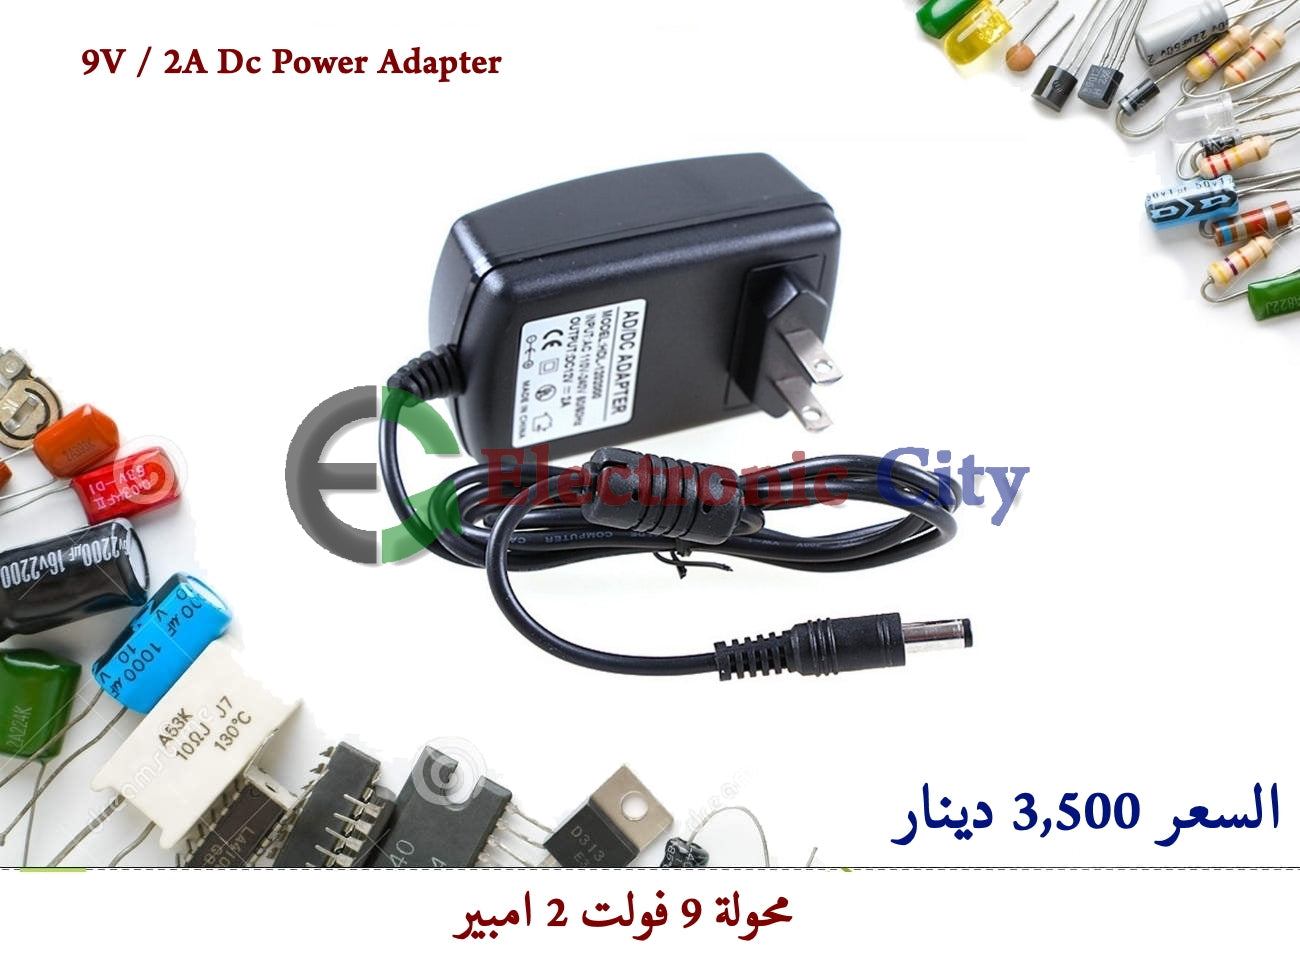 9v / 2A Dc Power Adapter #P11